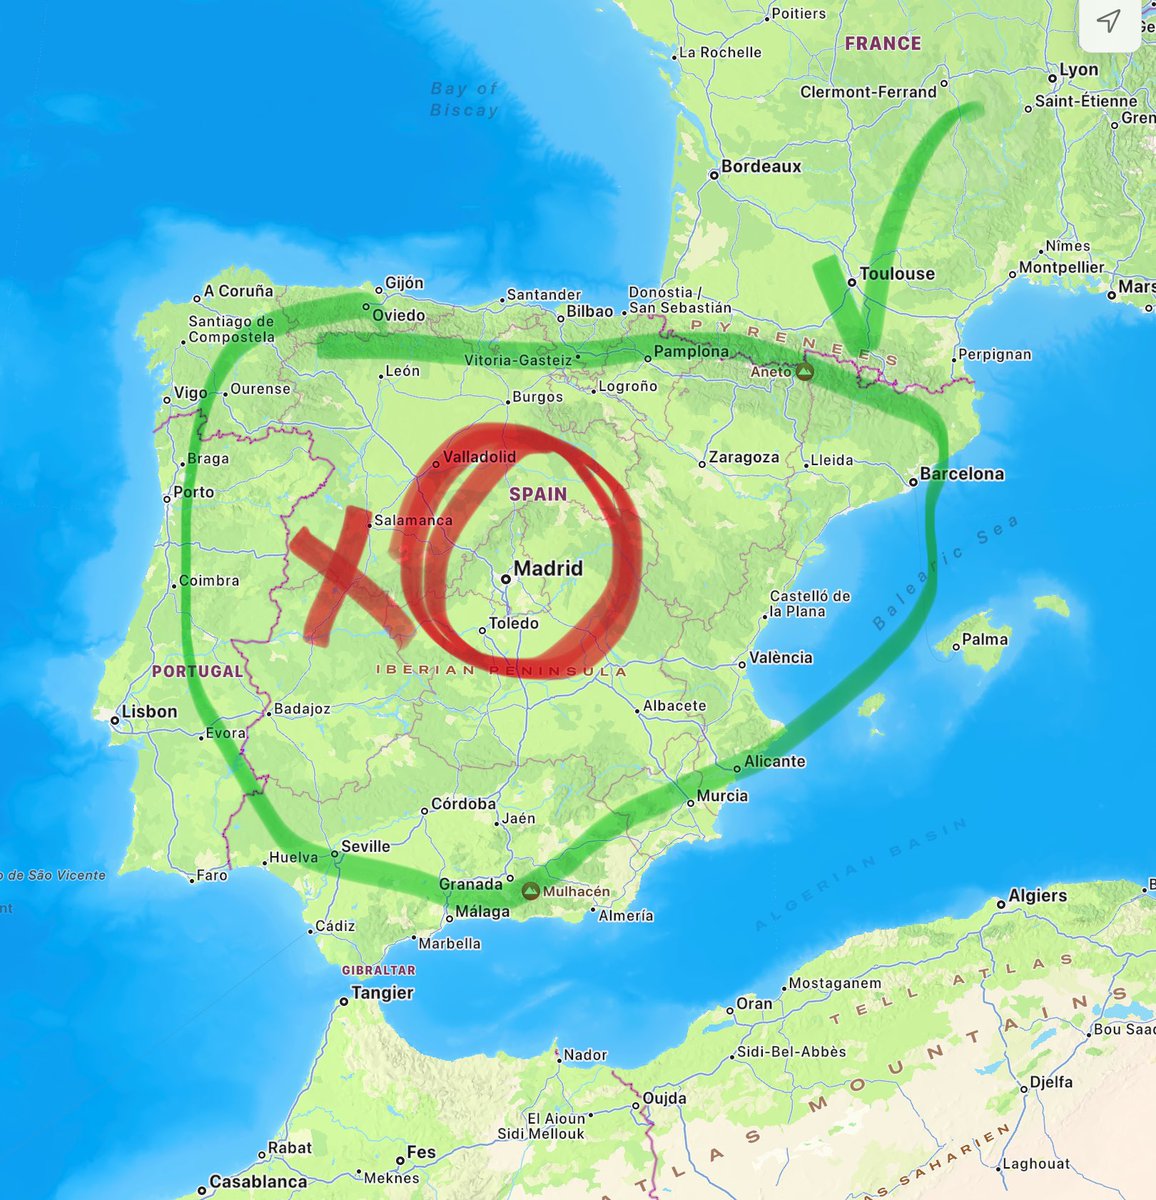 If you are a country with a strong desire to nuke Spain, just remember to aim to the center. Those who live near the shores of the Peninsula or close to the Pyrenees are not responsible for Madrid policies and, most of us, we are not even Spaniards. Thxs!